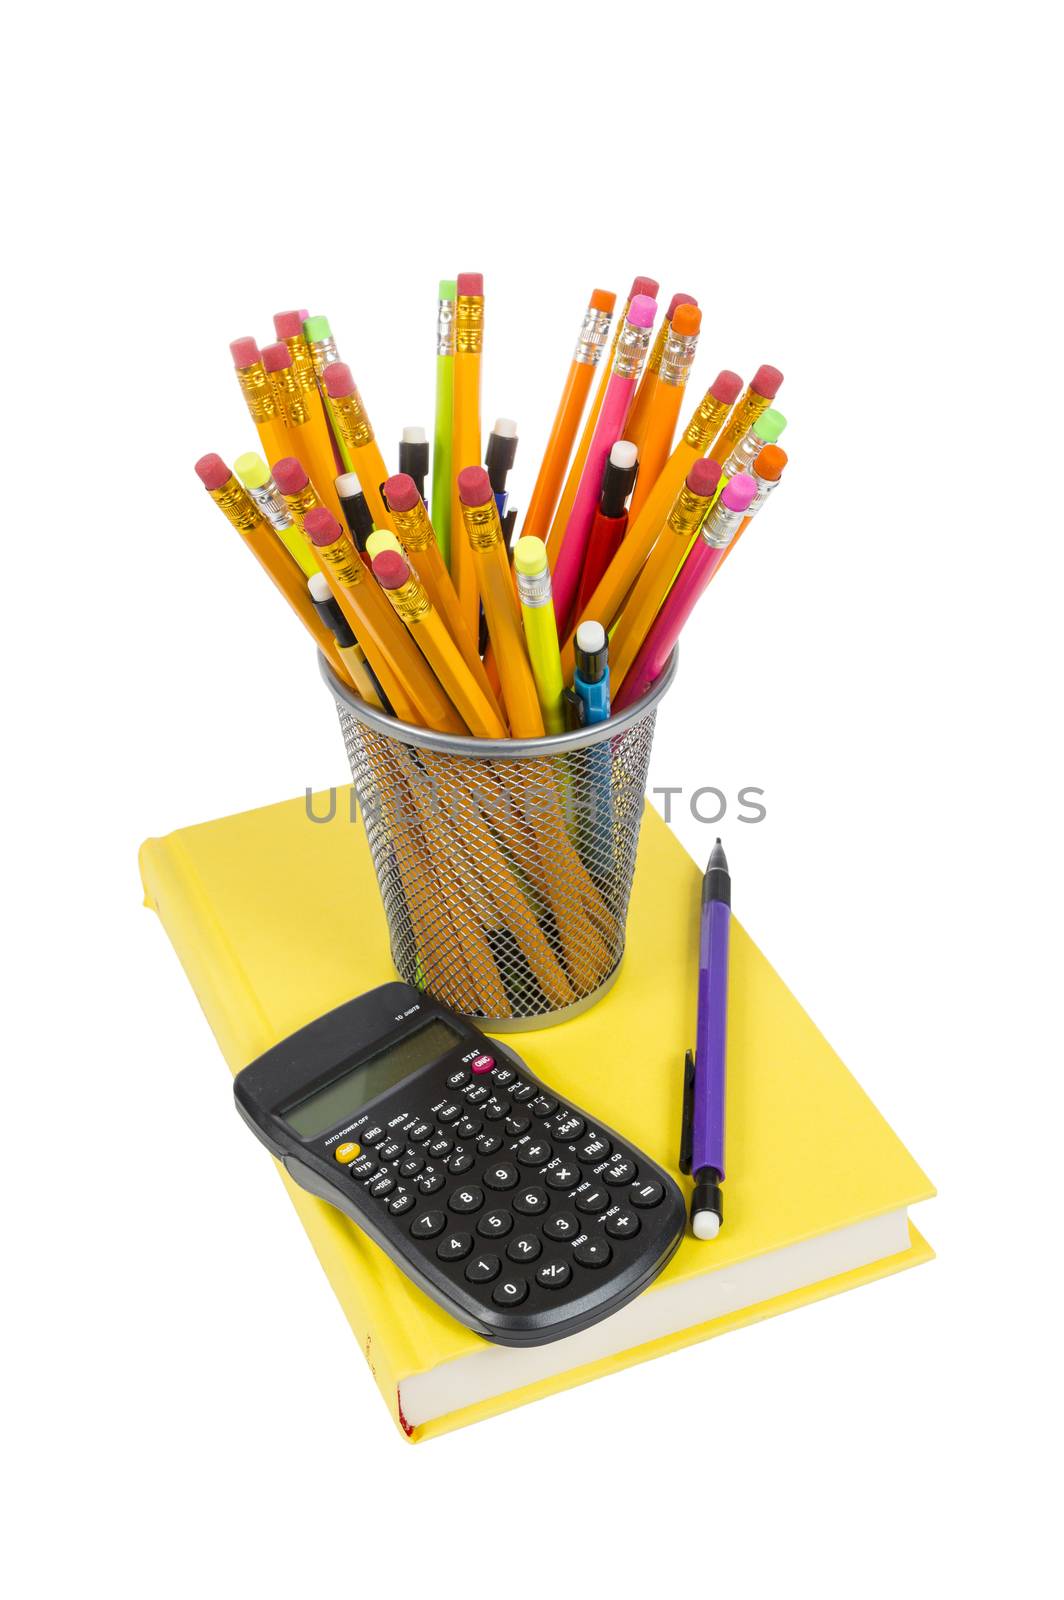 Calculator, Pencils and Bright Yellow Book by stockbuster1